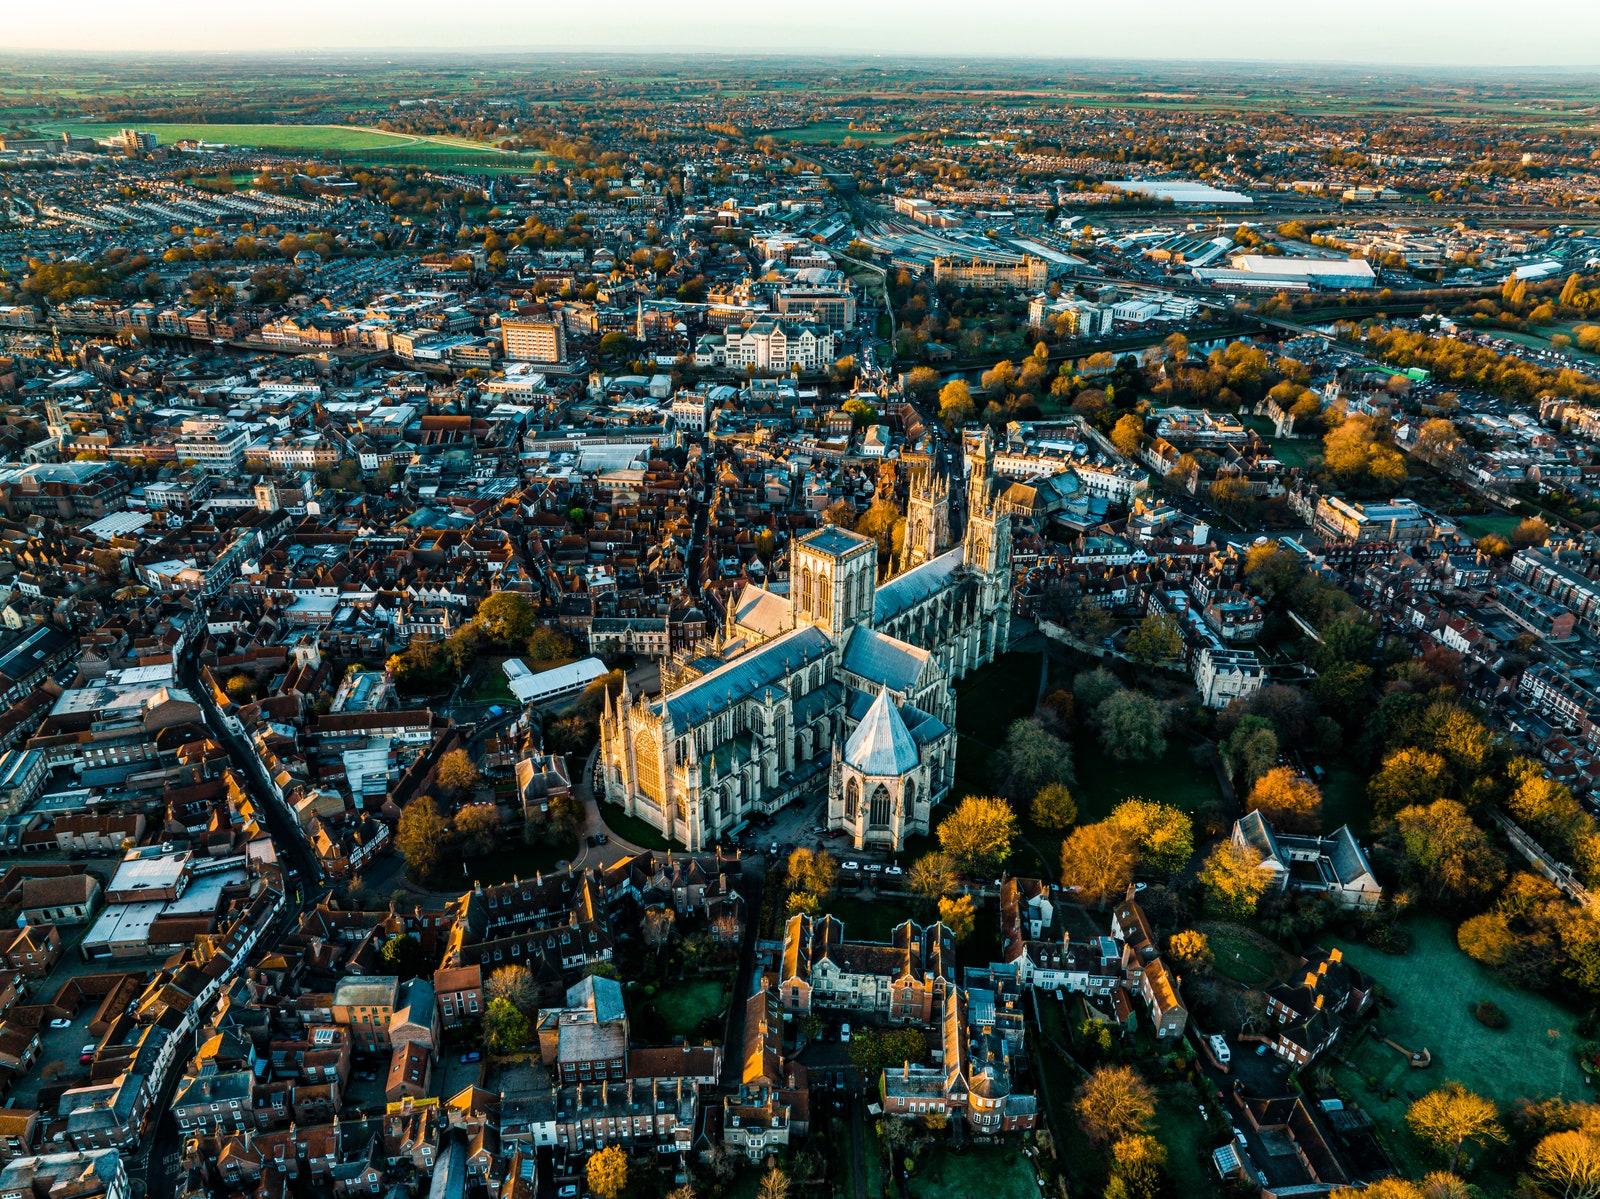 15 things to do in York, from street food to ghost tours